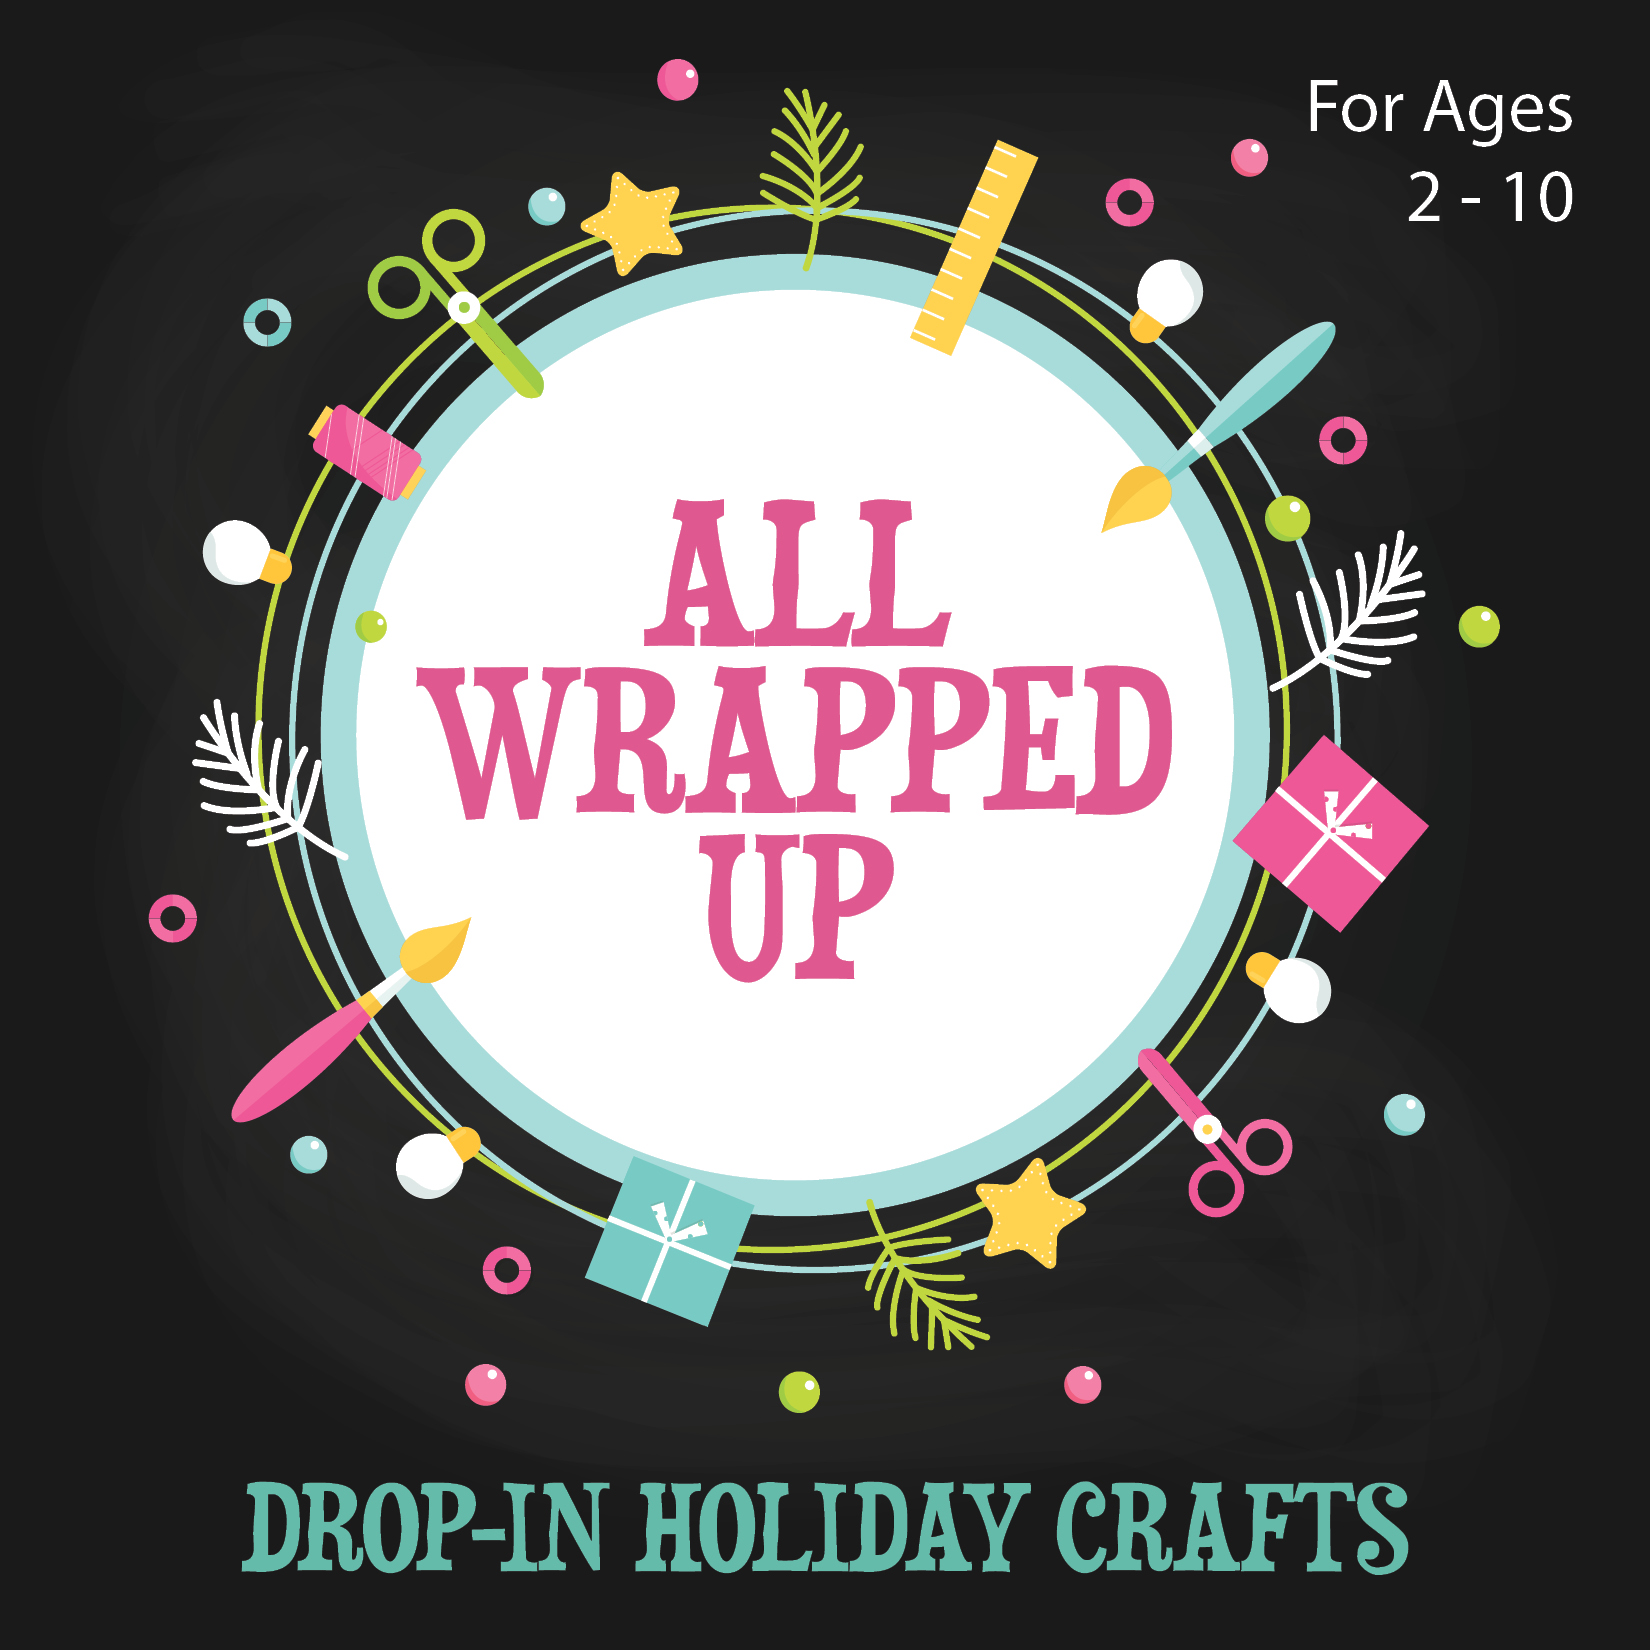 All Wrapped Up: Drop-In Holiday Crafts